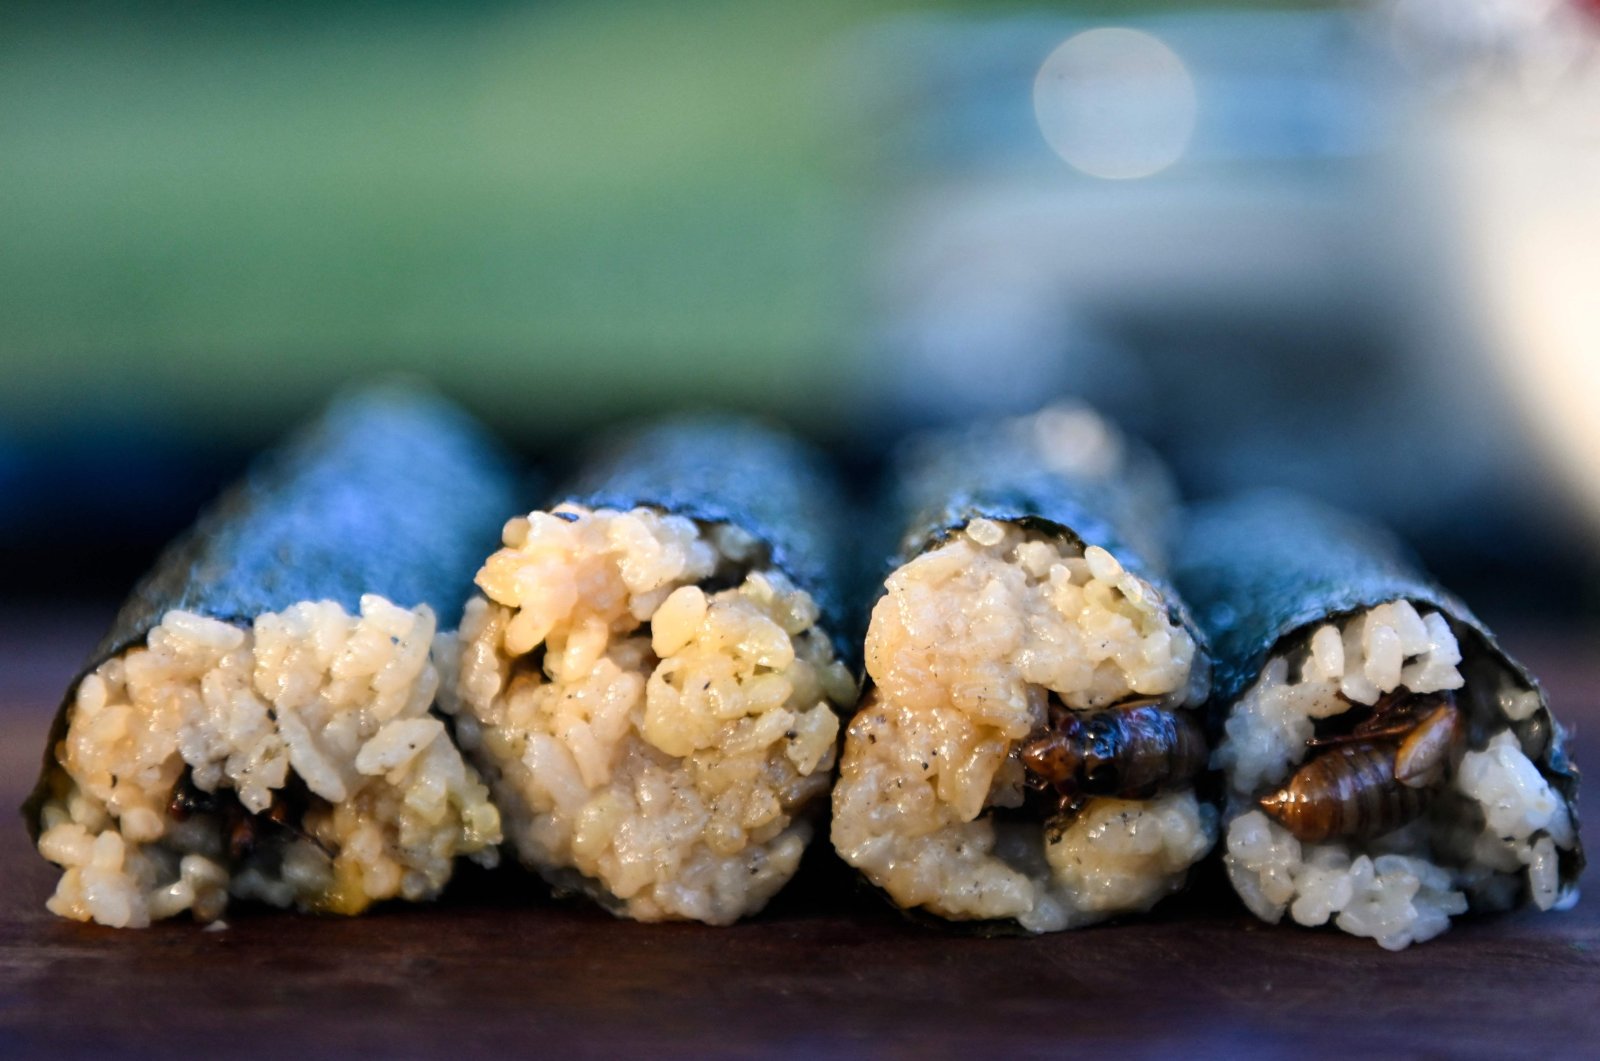 Fried cicadas are rolled into a sushi roll by Chef Bun Lai at Fort Totten Park in Washington D.C., U.S., May 23, 2021. (AFP Photo)